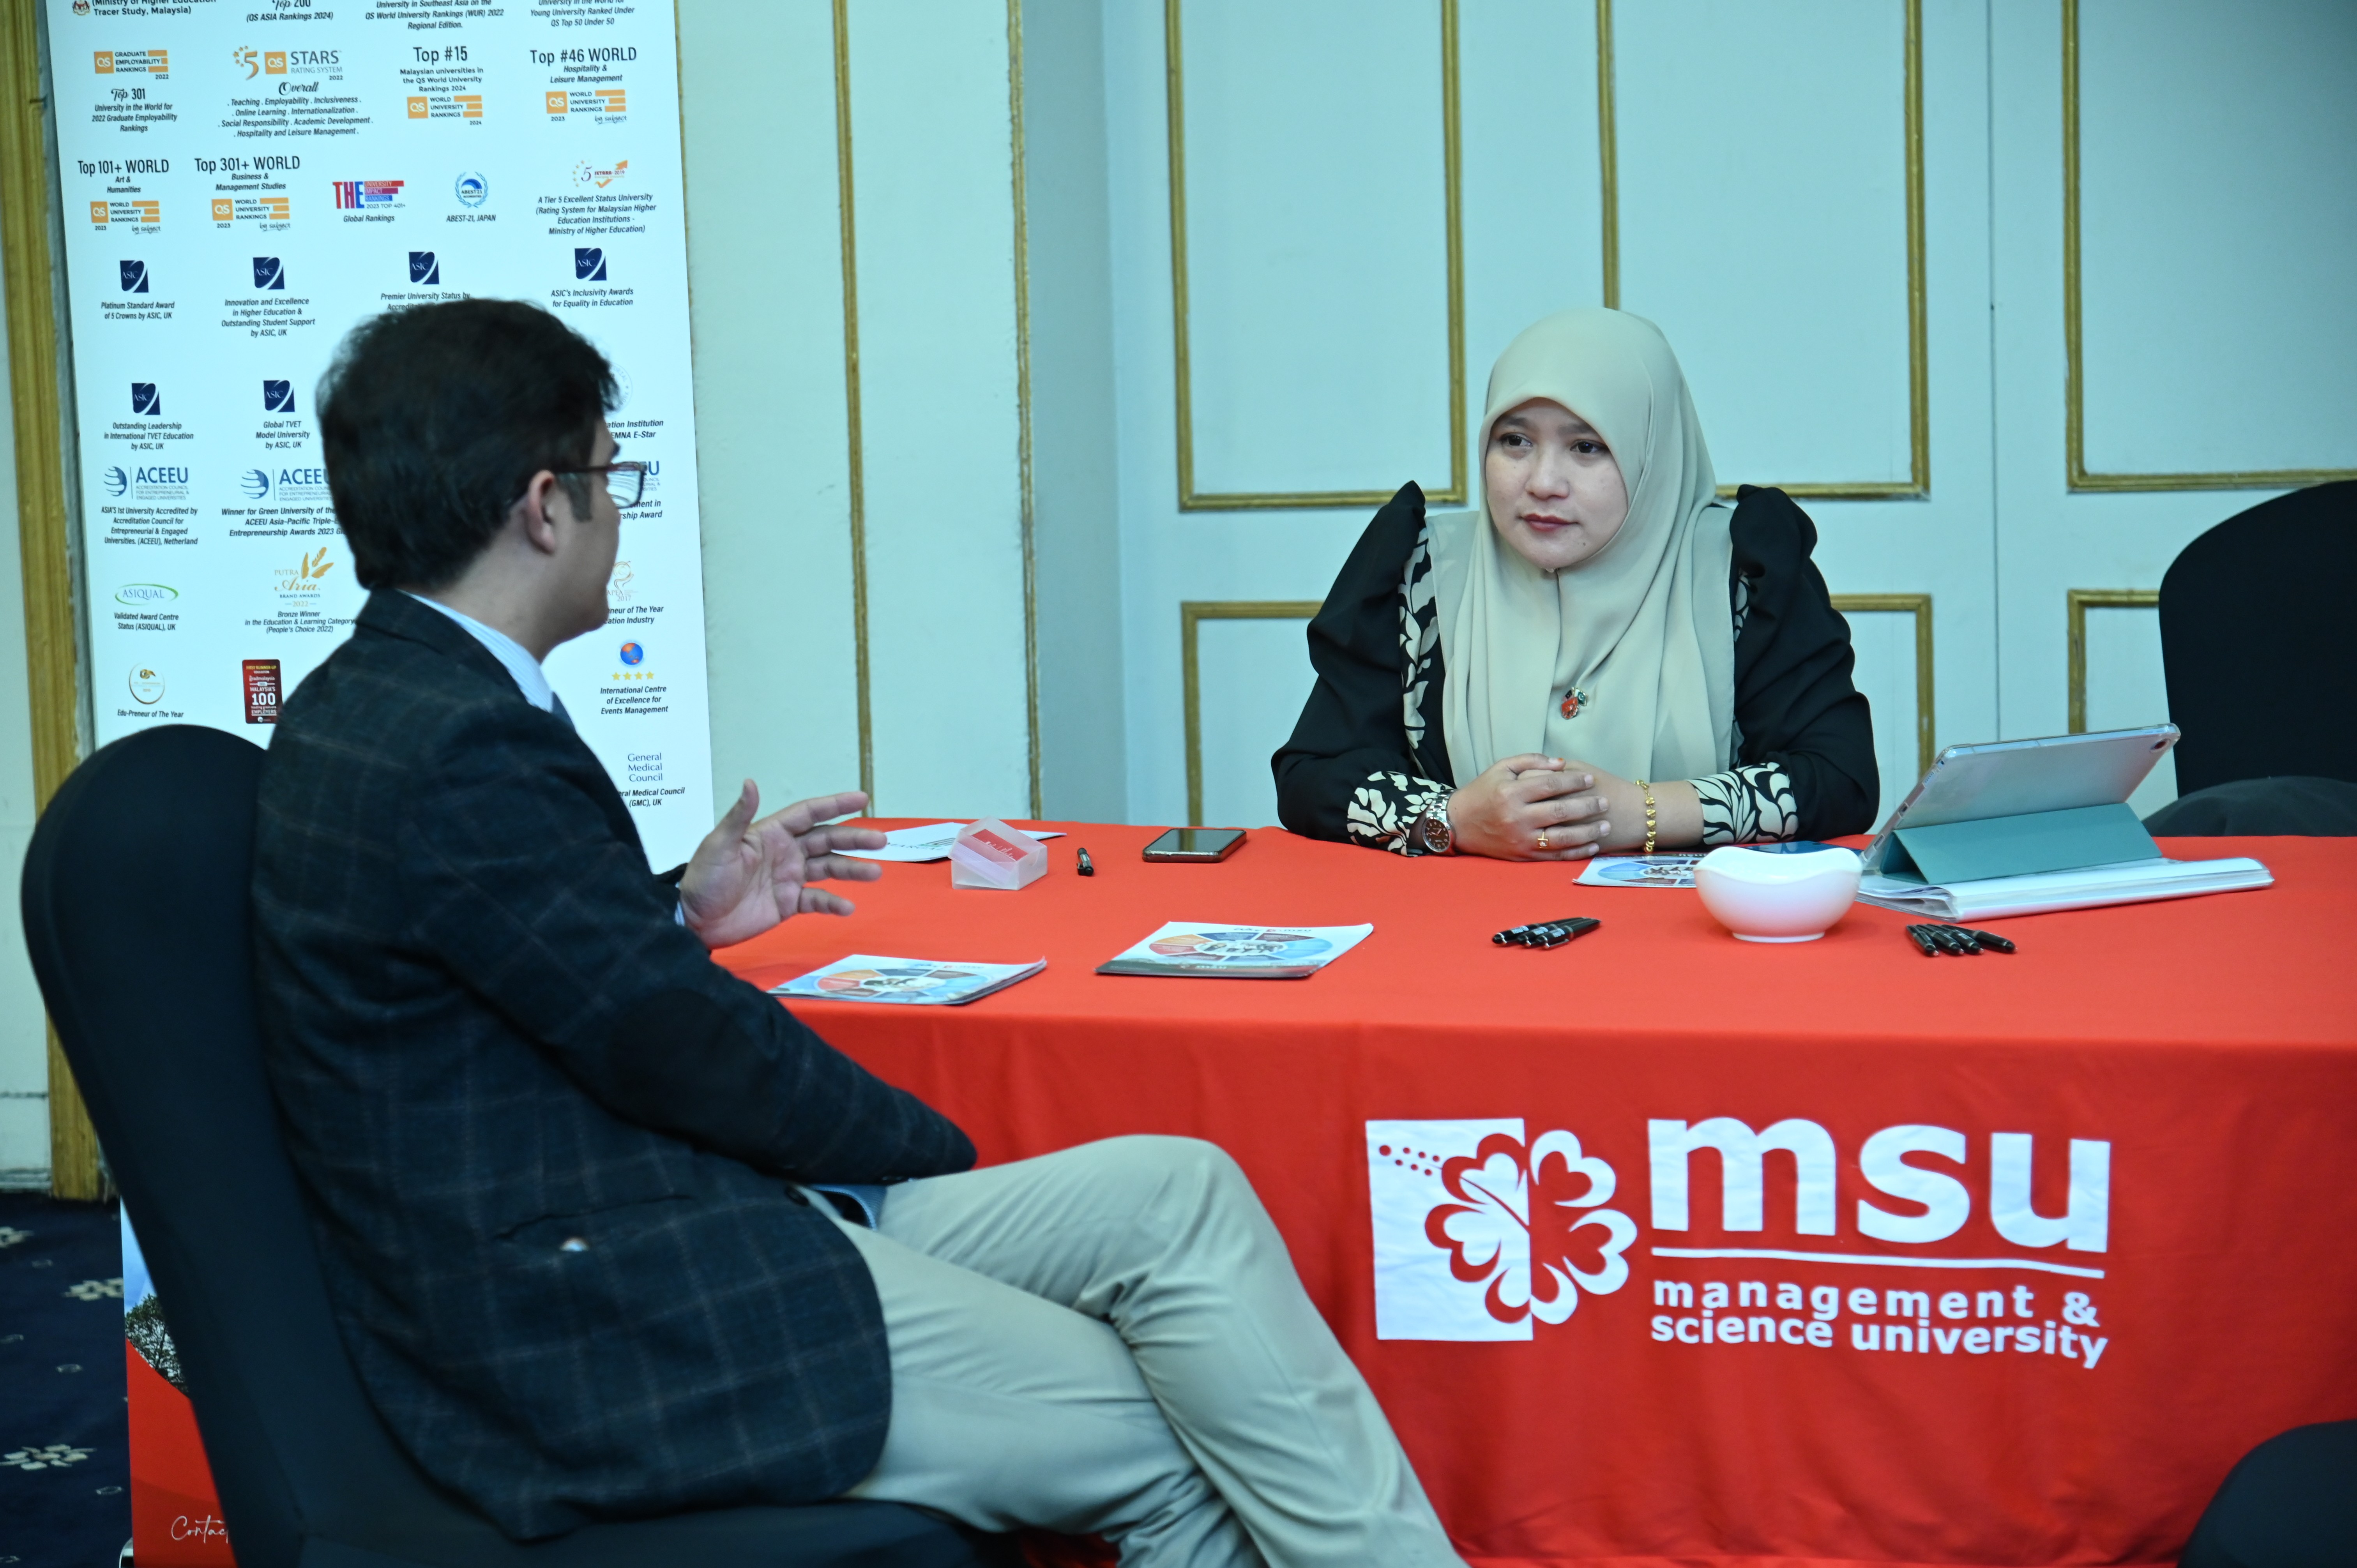 The management and science university briefing a student during the International Education Expo 2024